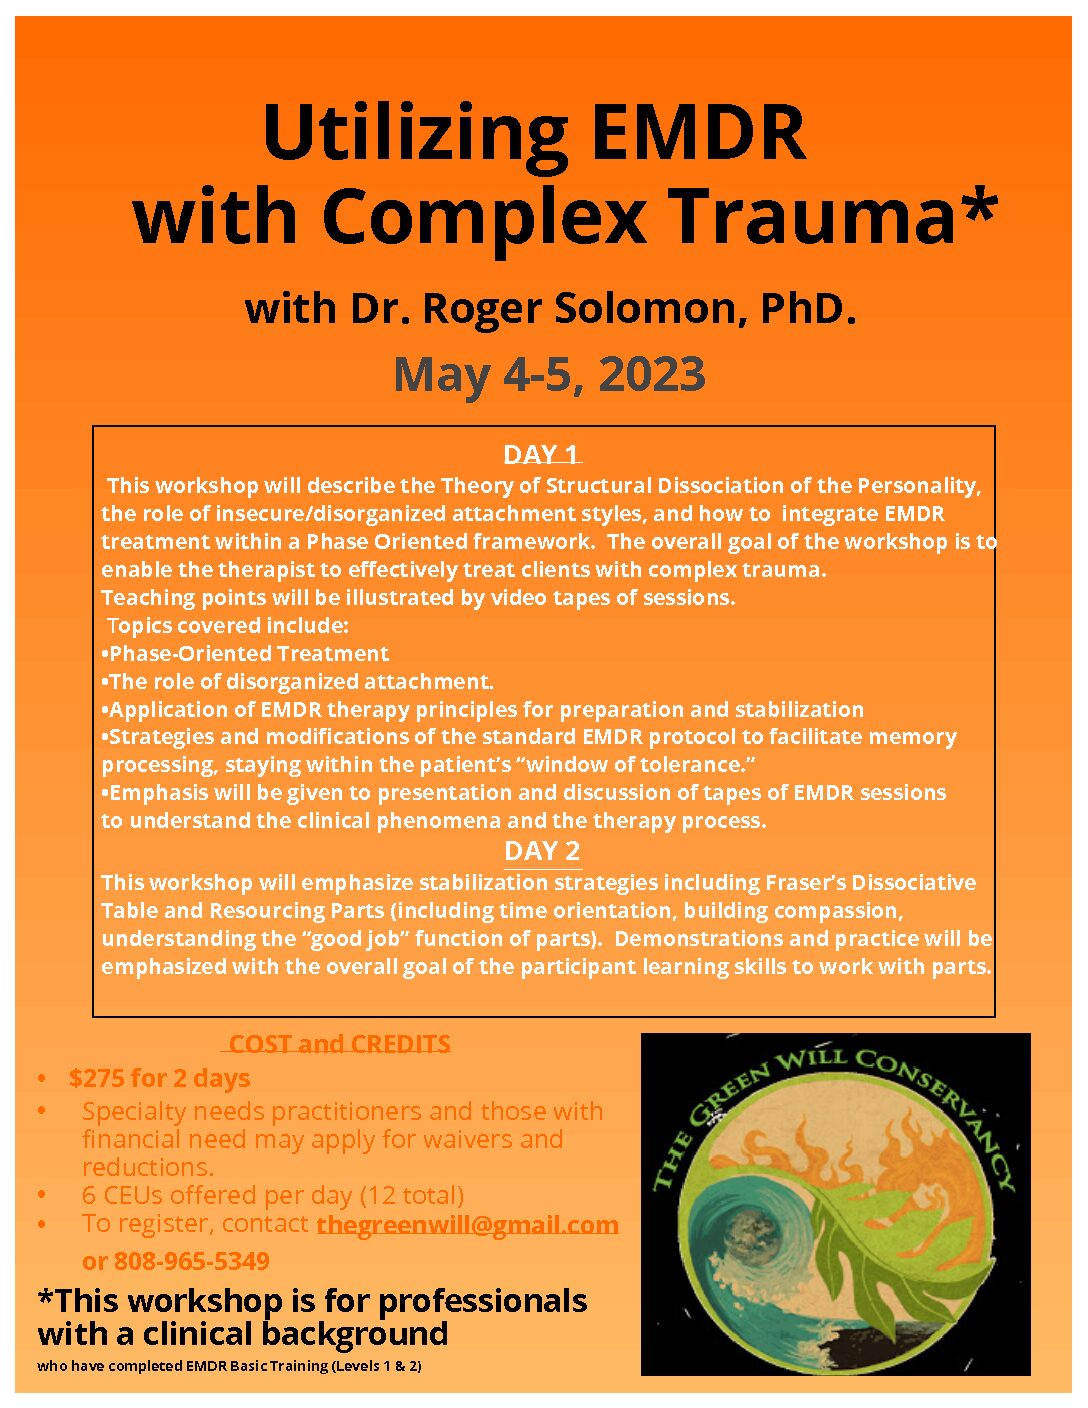 Utilizing EMDR with Complex TraumaDr. Roger Solomon, PhD. / Co-Sponsored by the Green Will Conservancy